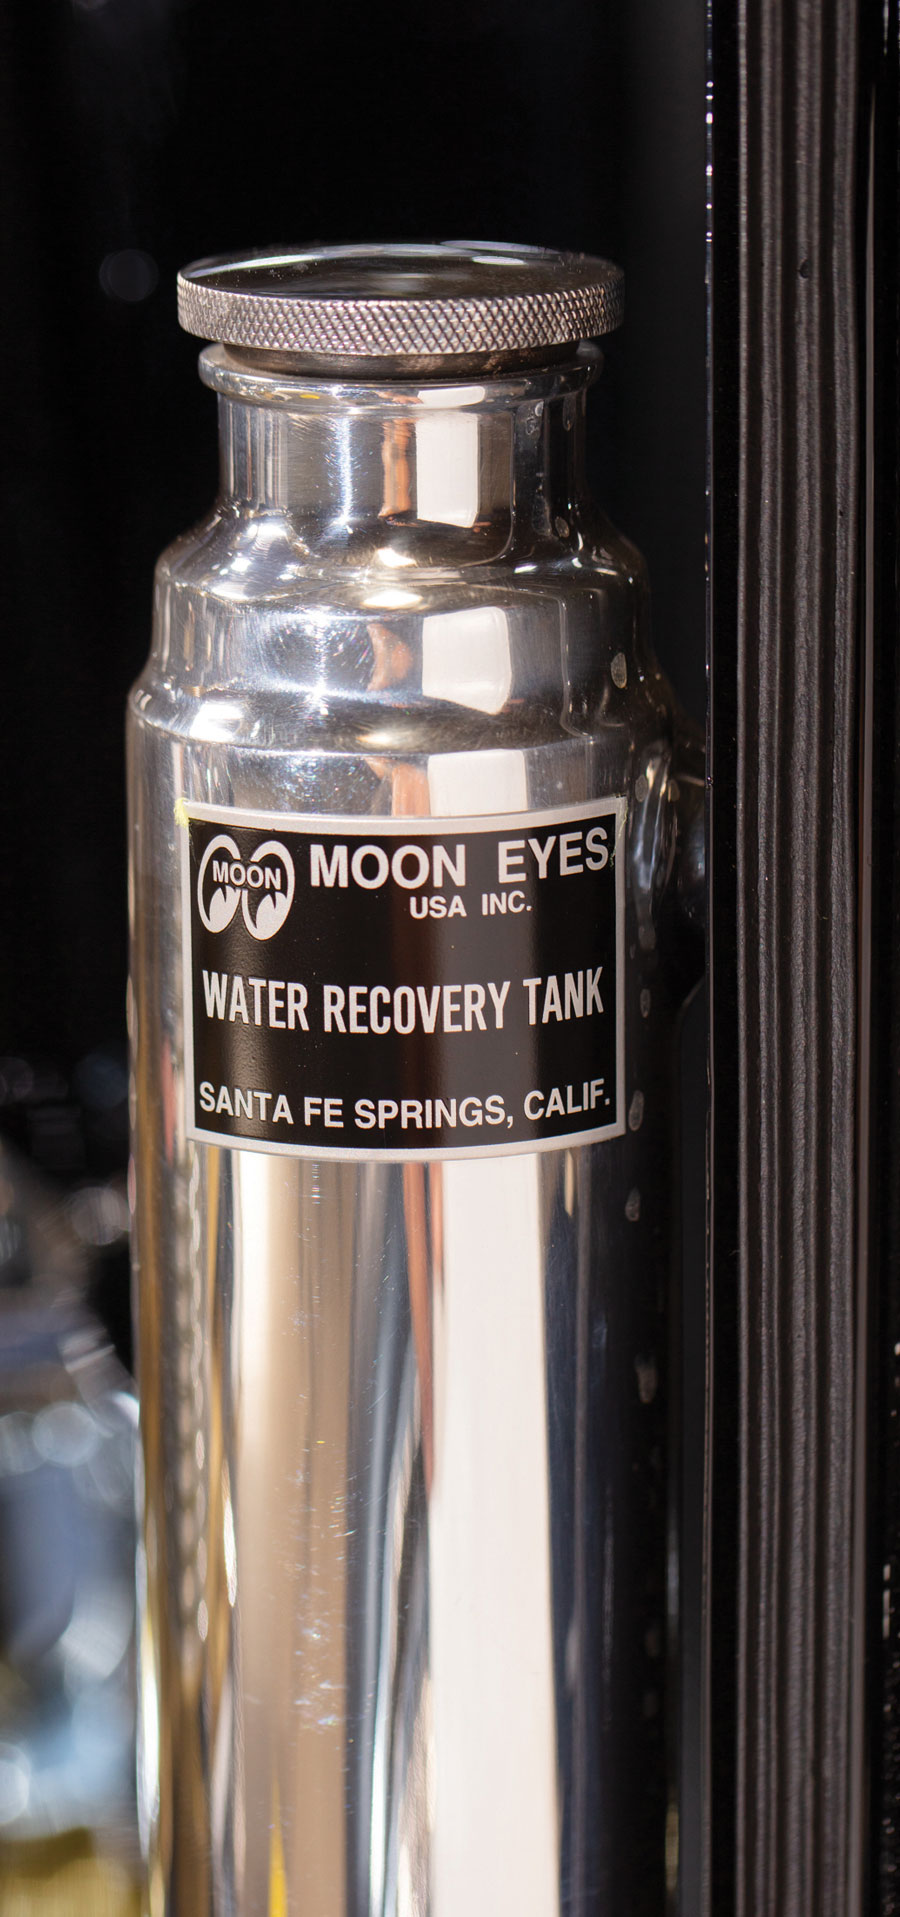 Chrome Moon Eyes Water Recovery Tank